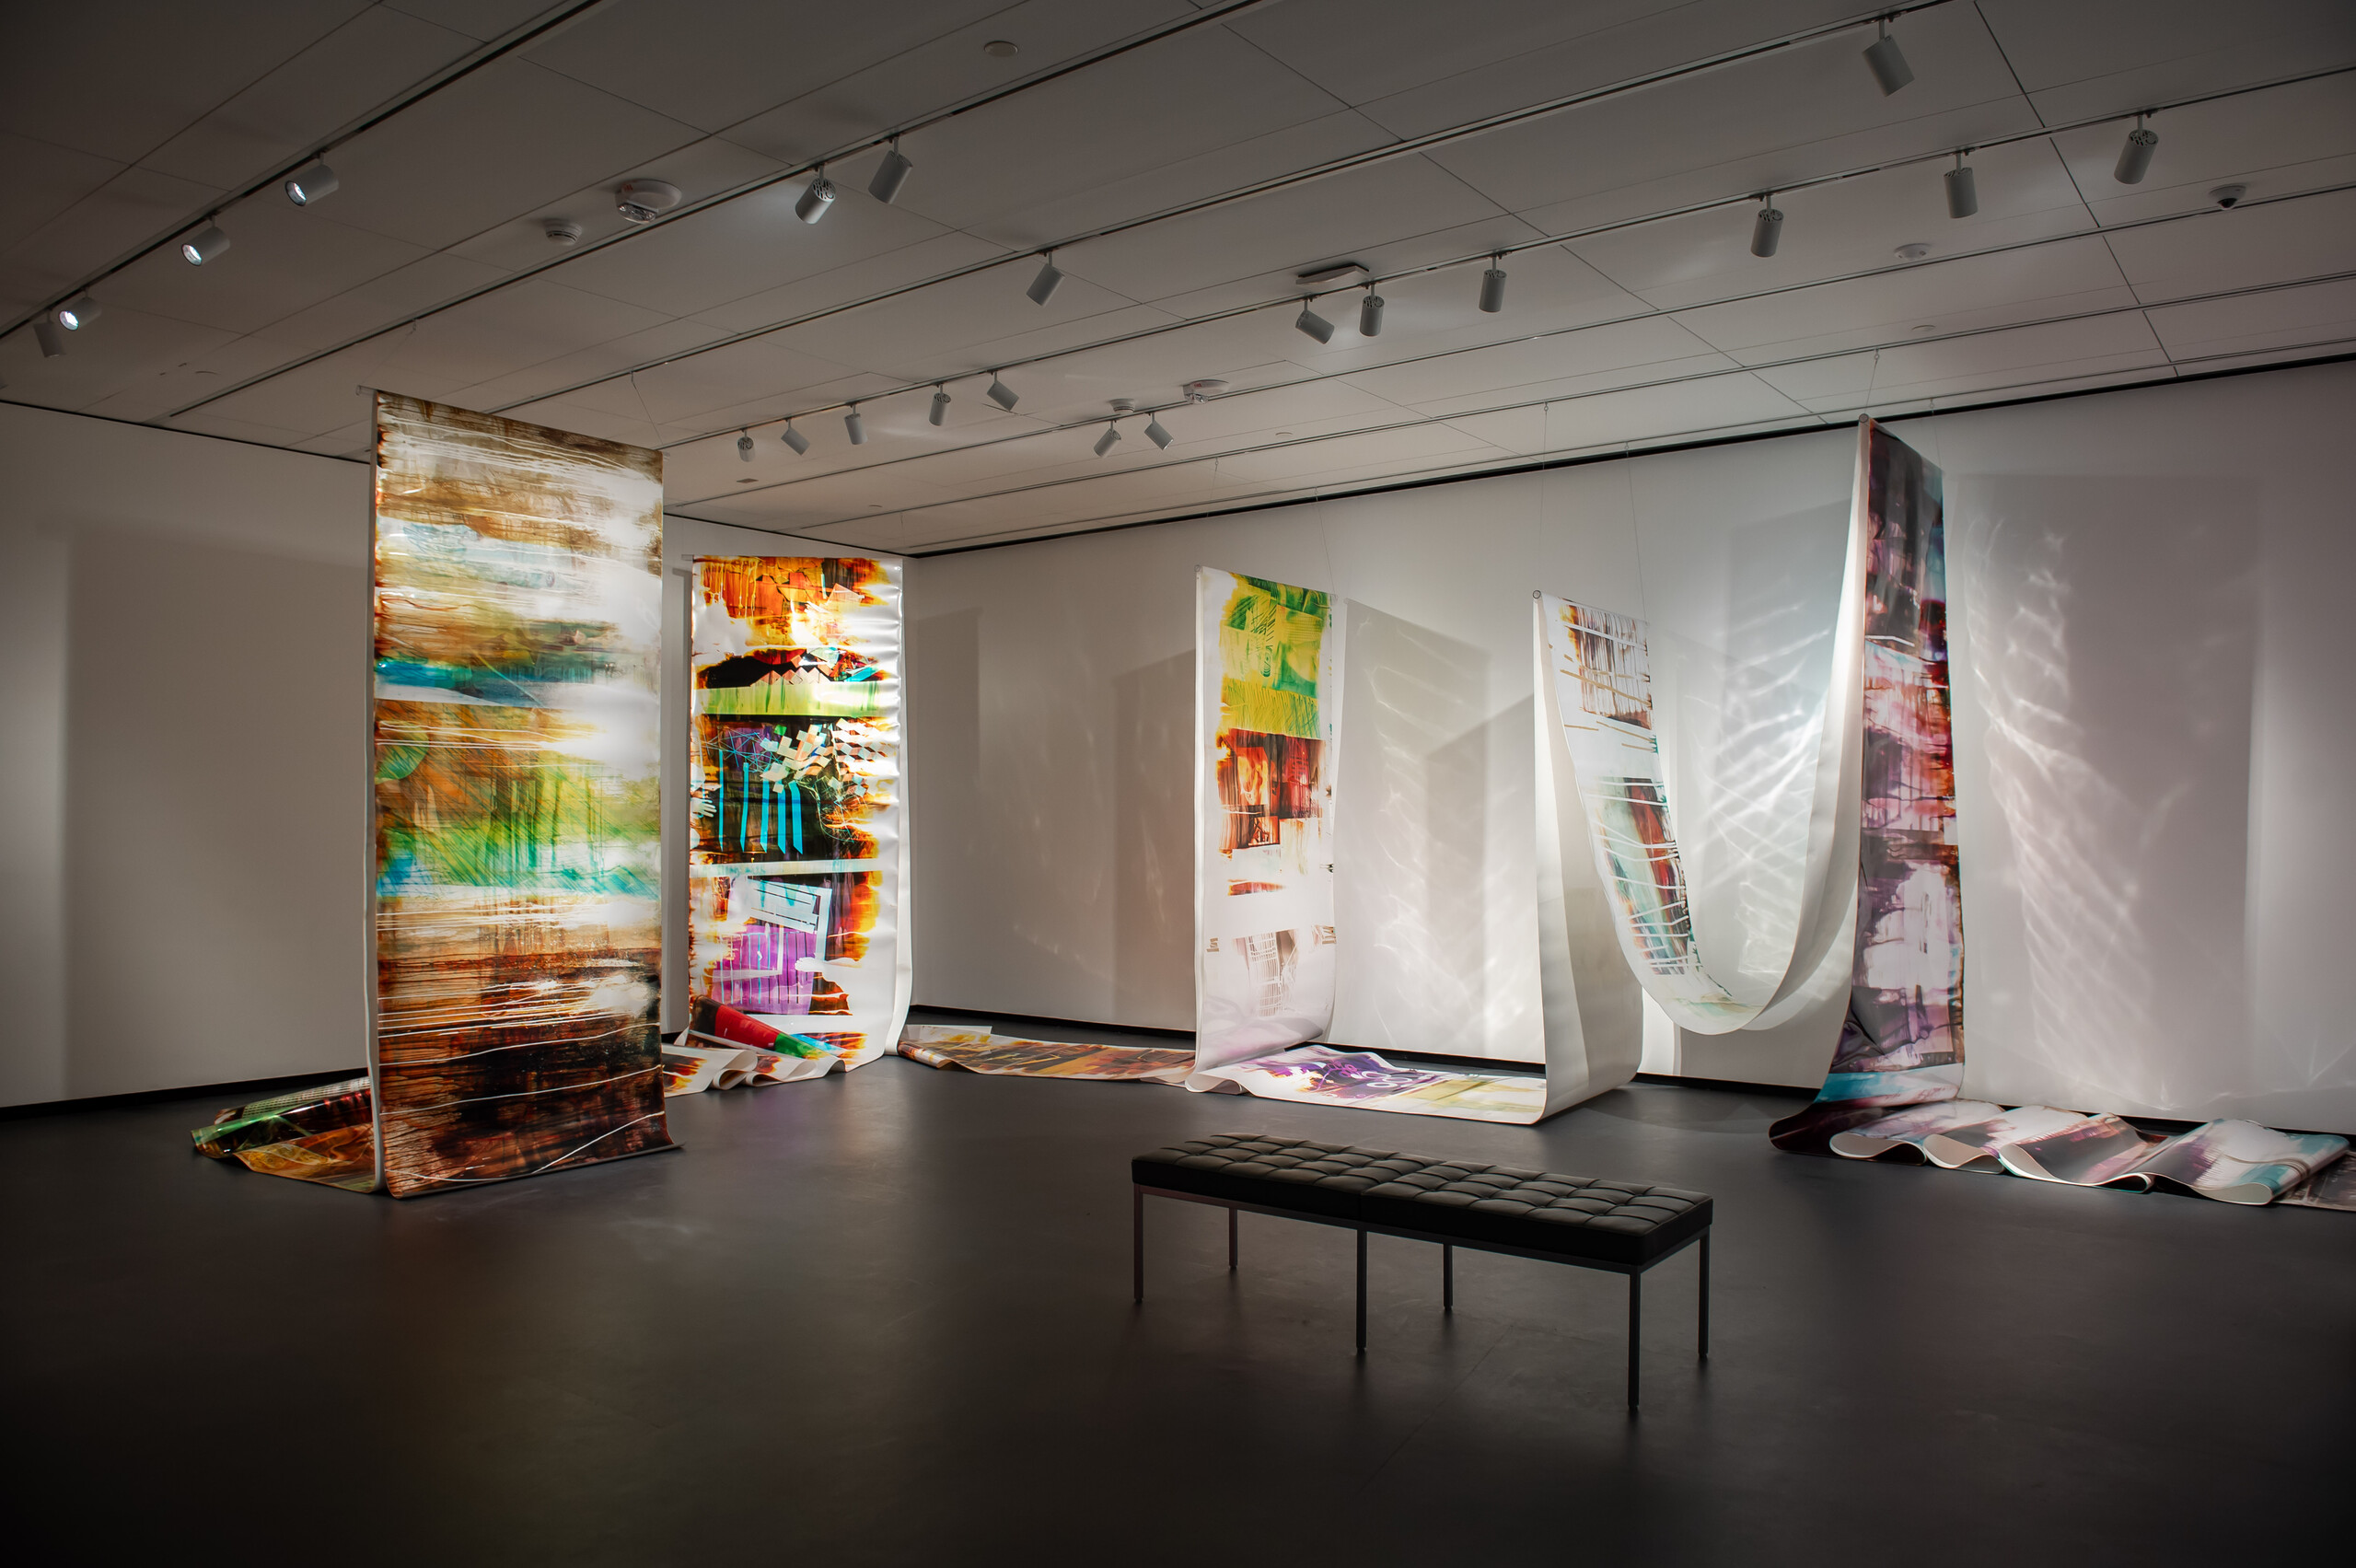 View of a gallery space. Several large tapestries are hanging from the ceiling. Colorful broad paint strokes are painted onto the white canvases. The canvases are partly covering the floor. A bench is standing in the middle of the gallery.